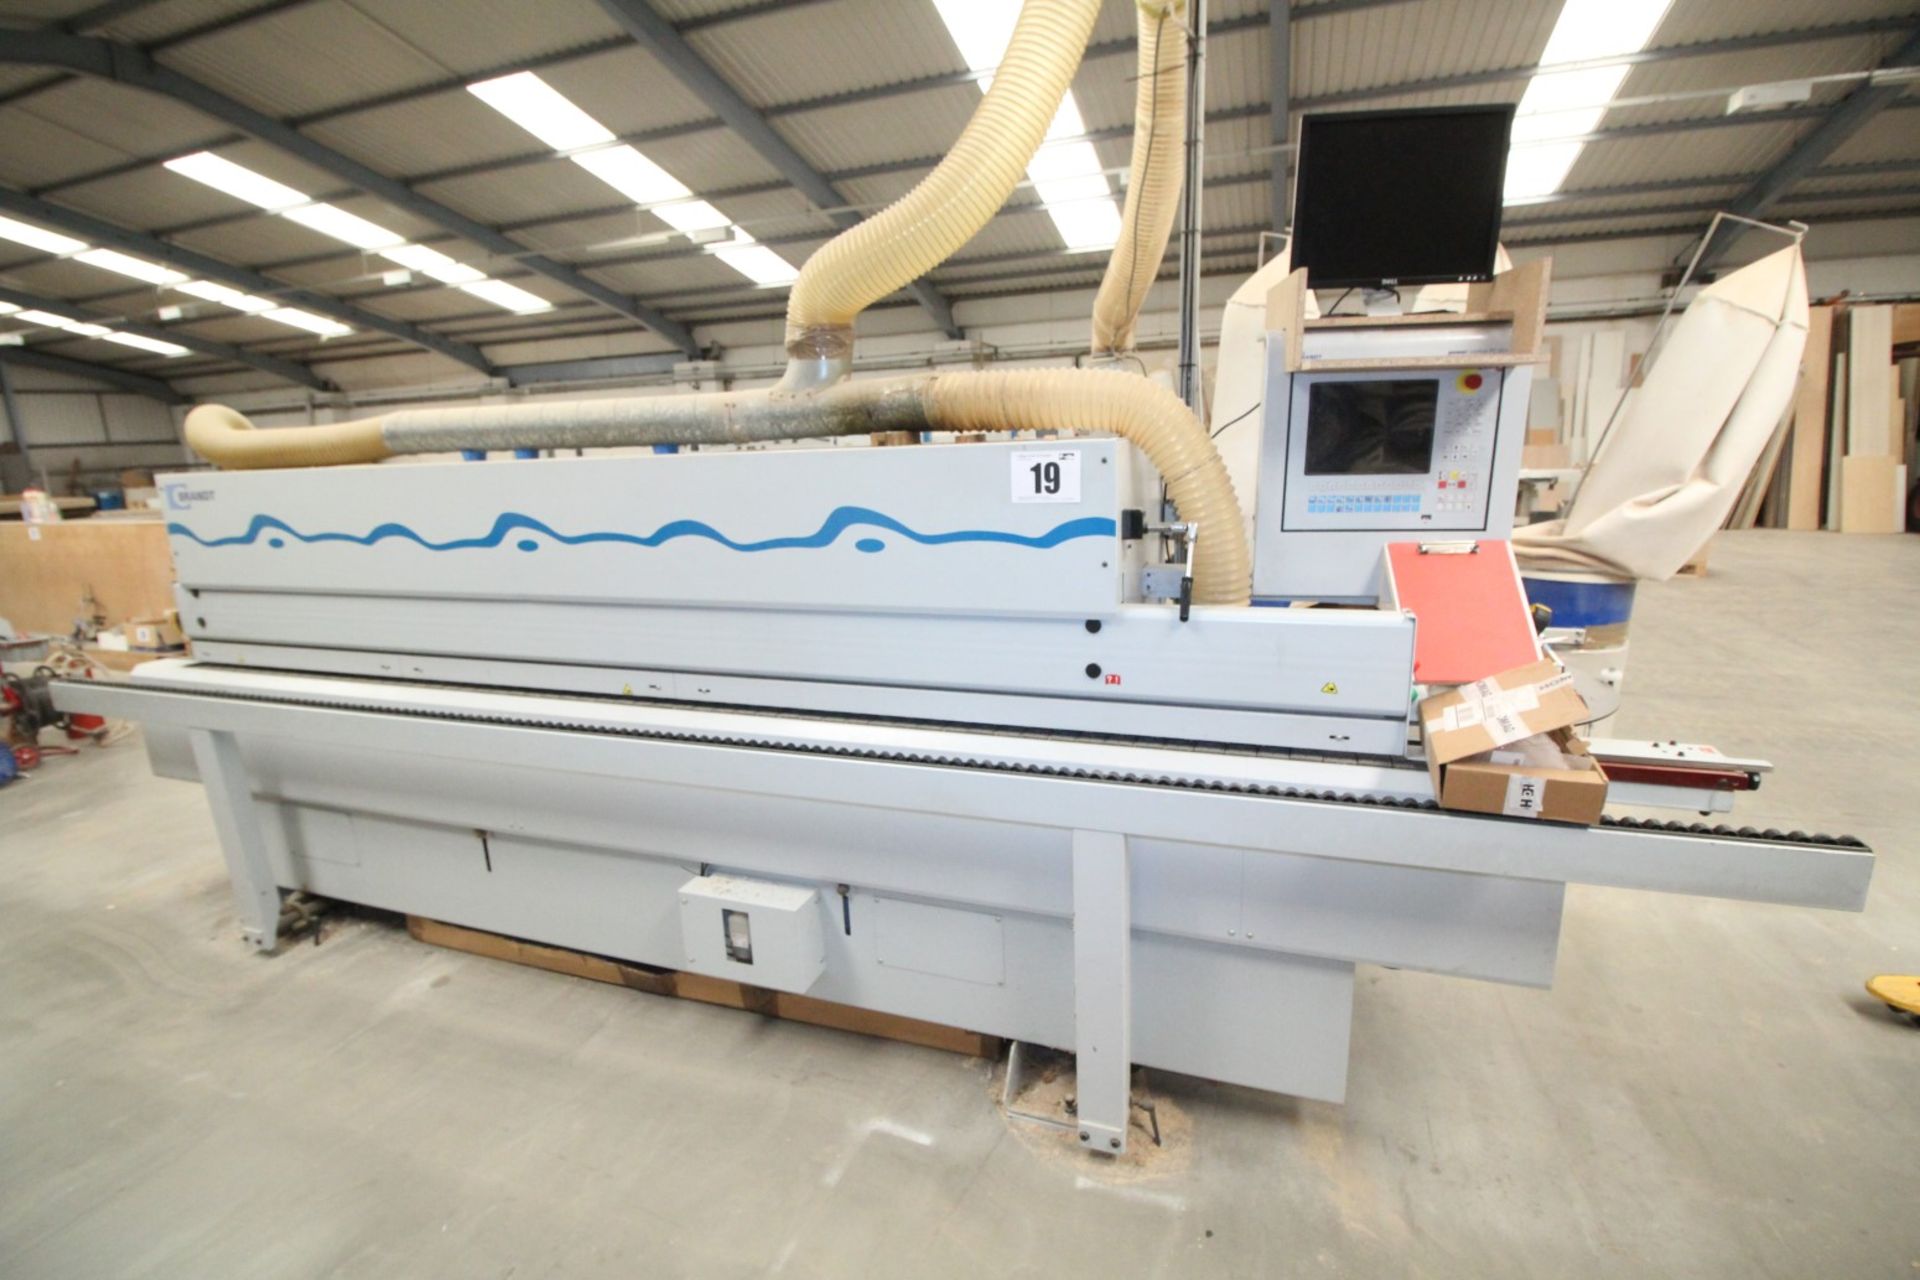 BRANDT OPTIMAT KDF530C EDGE BANDER, YEAR OF MANUFACTURE 2007, SERIAL NO. 0261022791, COMPLETE WITH